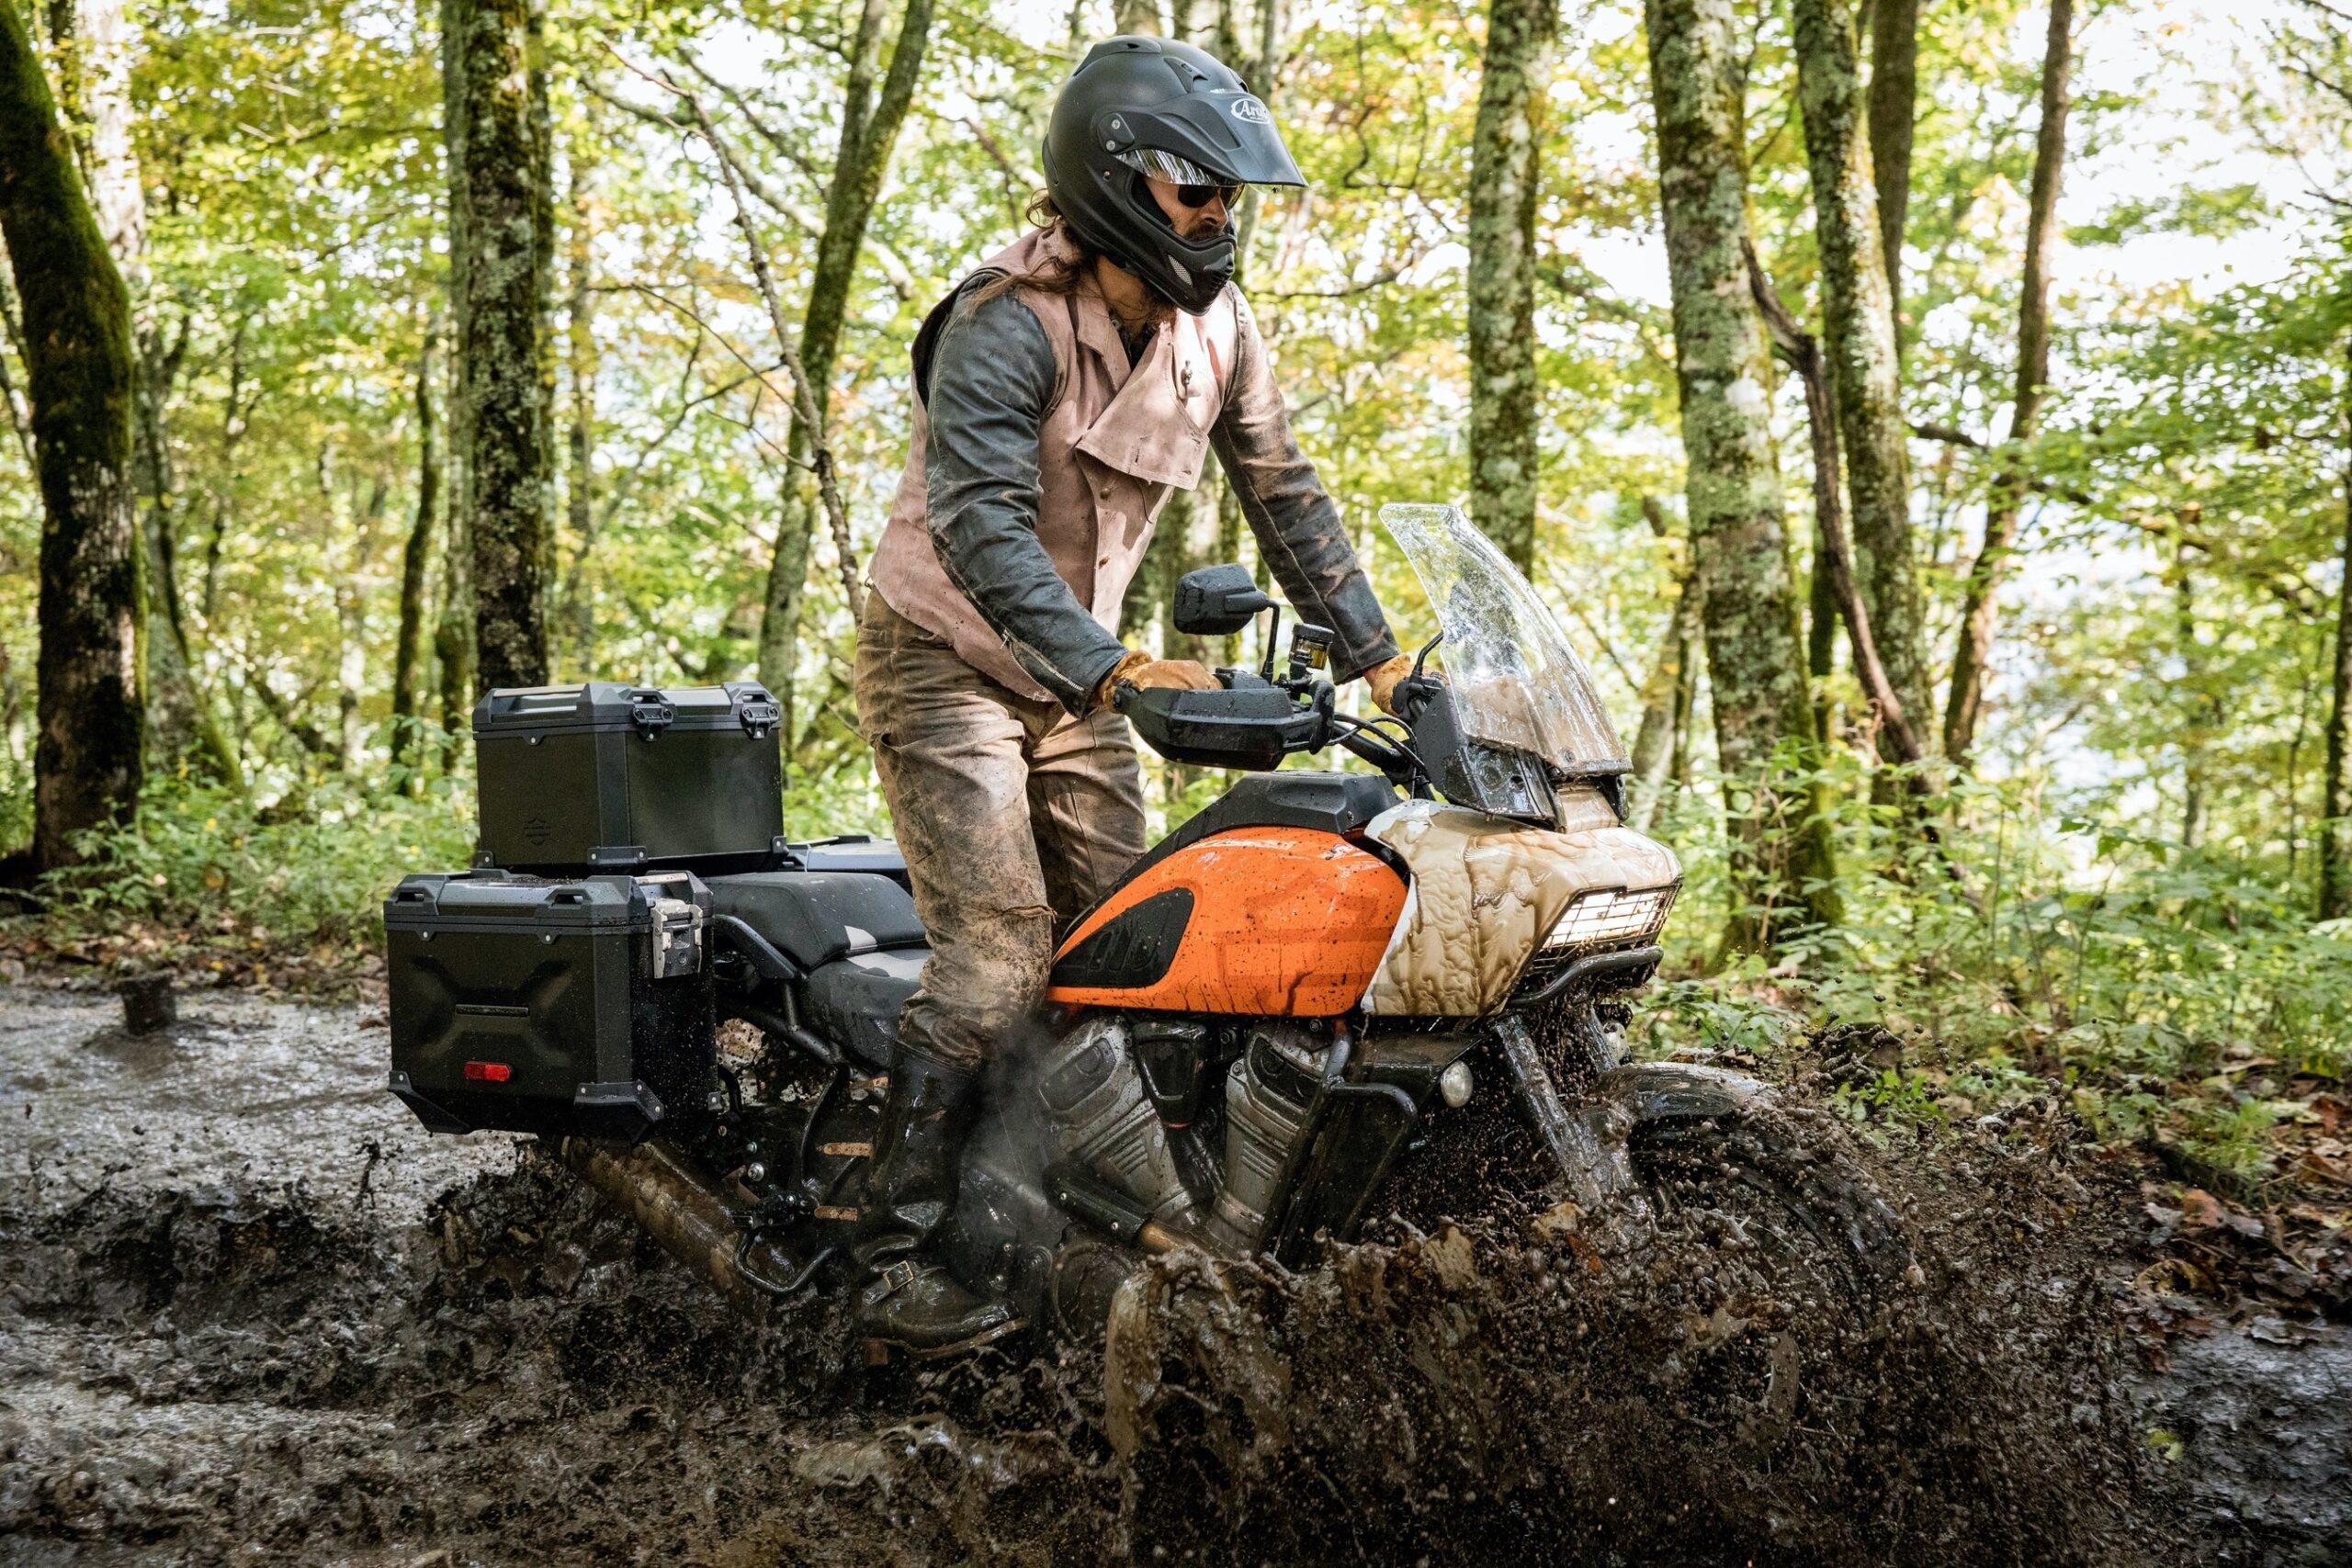 Explore Endless Horizons: Harley-Davidson Opens The Throttle To Off-Road Adventures